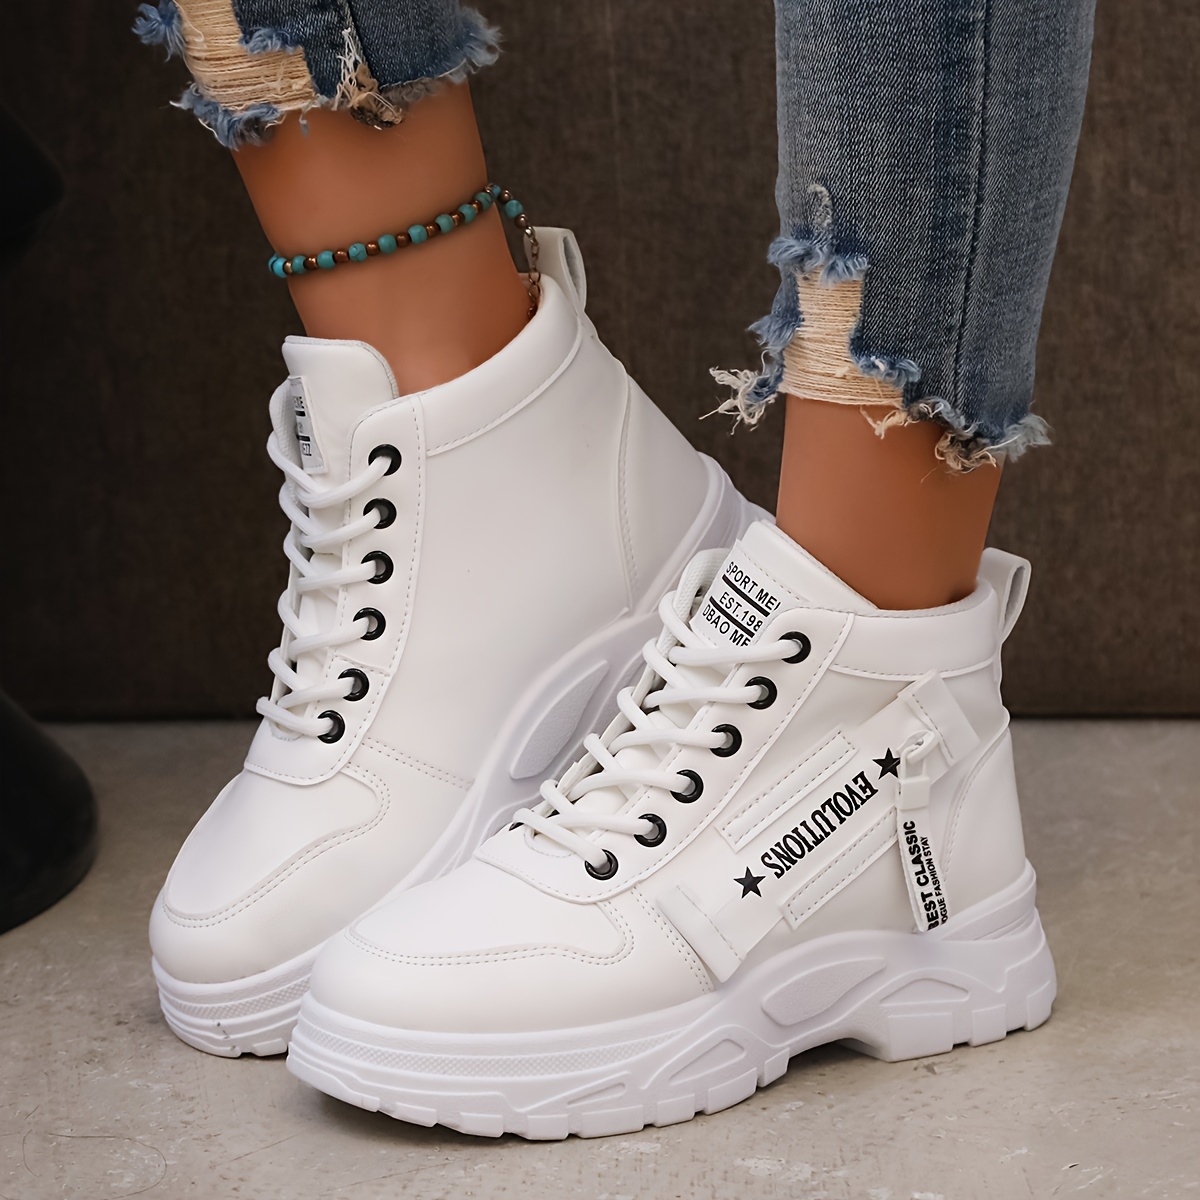 womens plush lined sneakers winter warm lace up high top ankle boots thermal outdoor shoes details 7